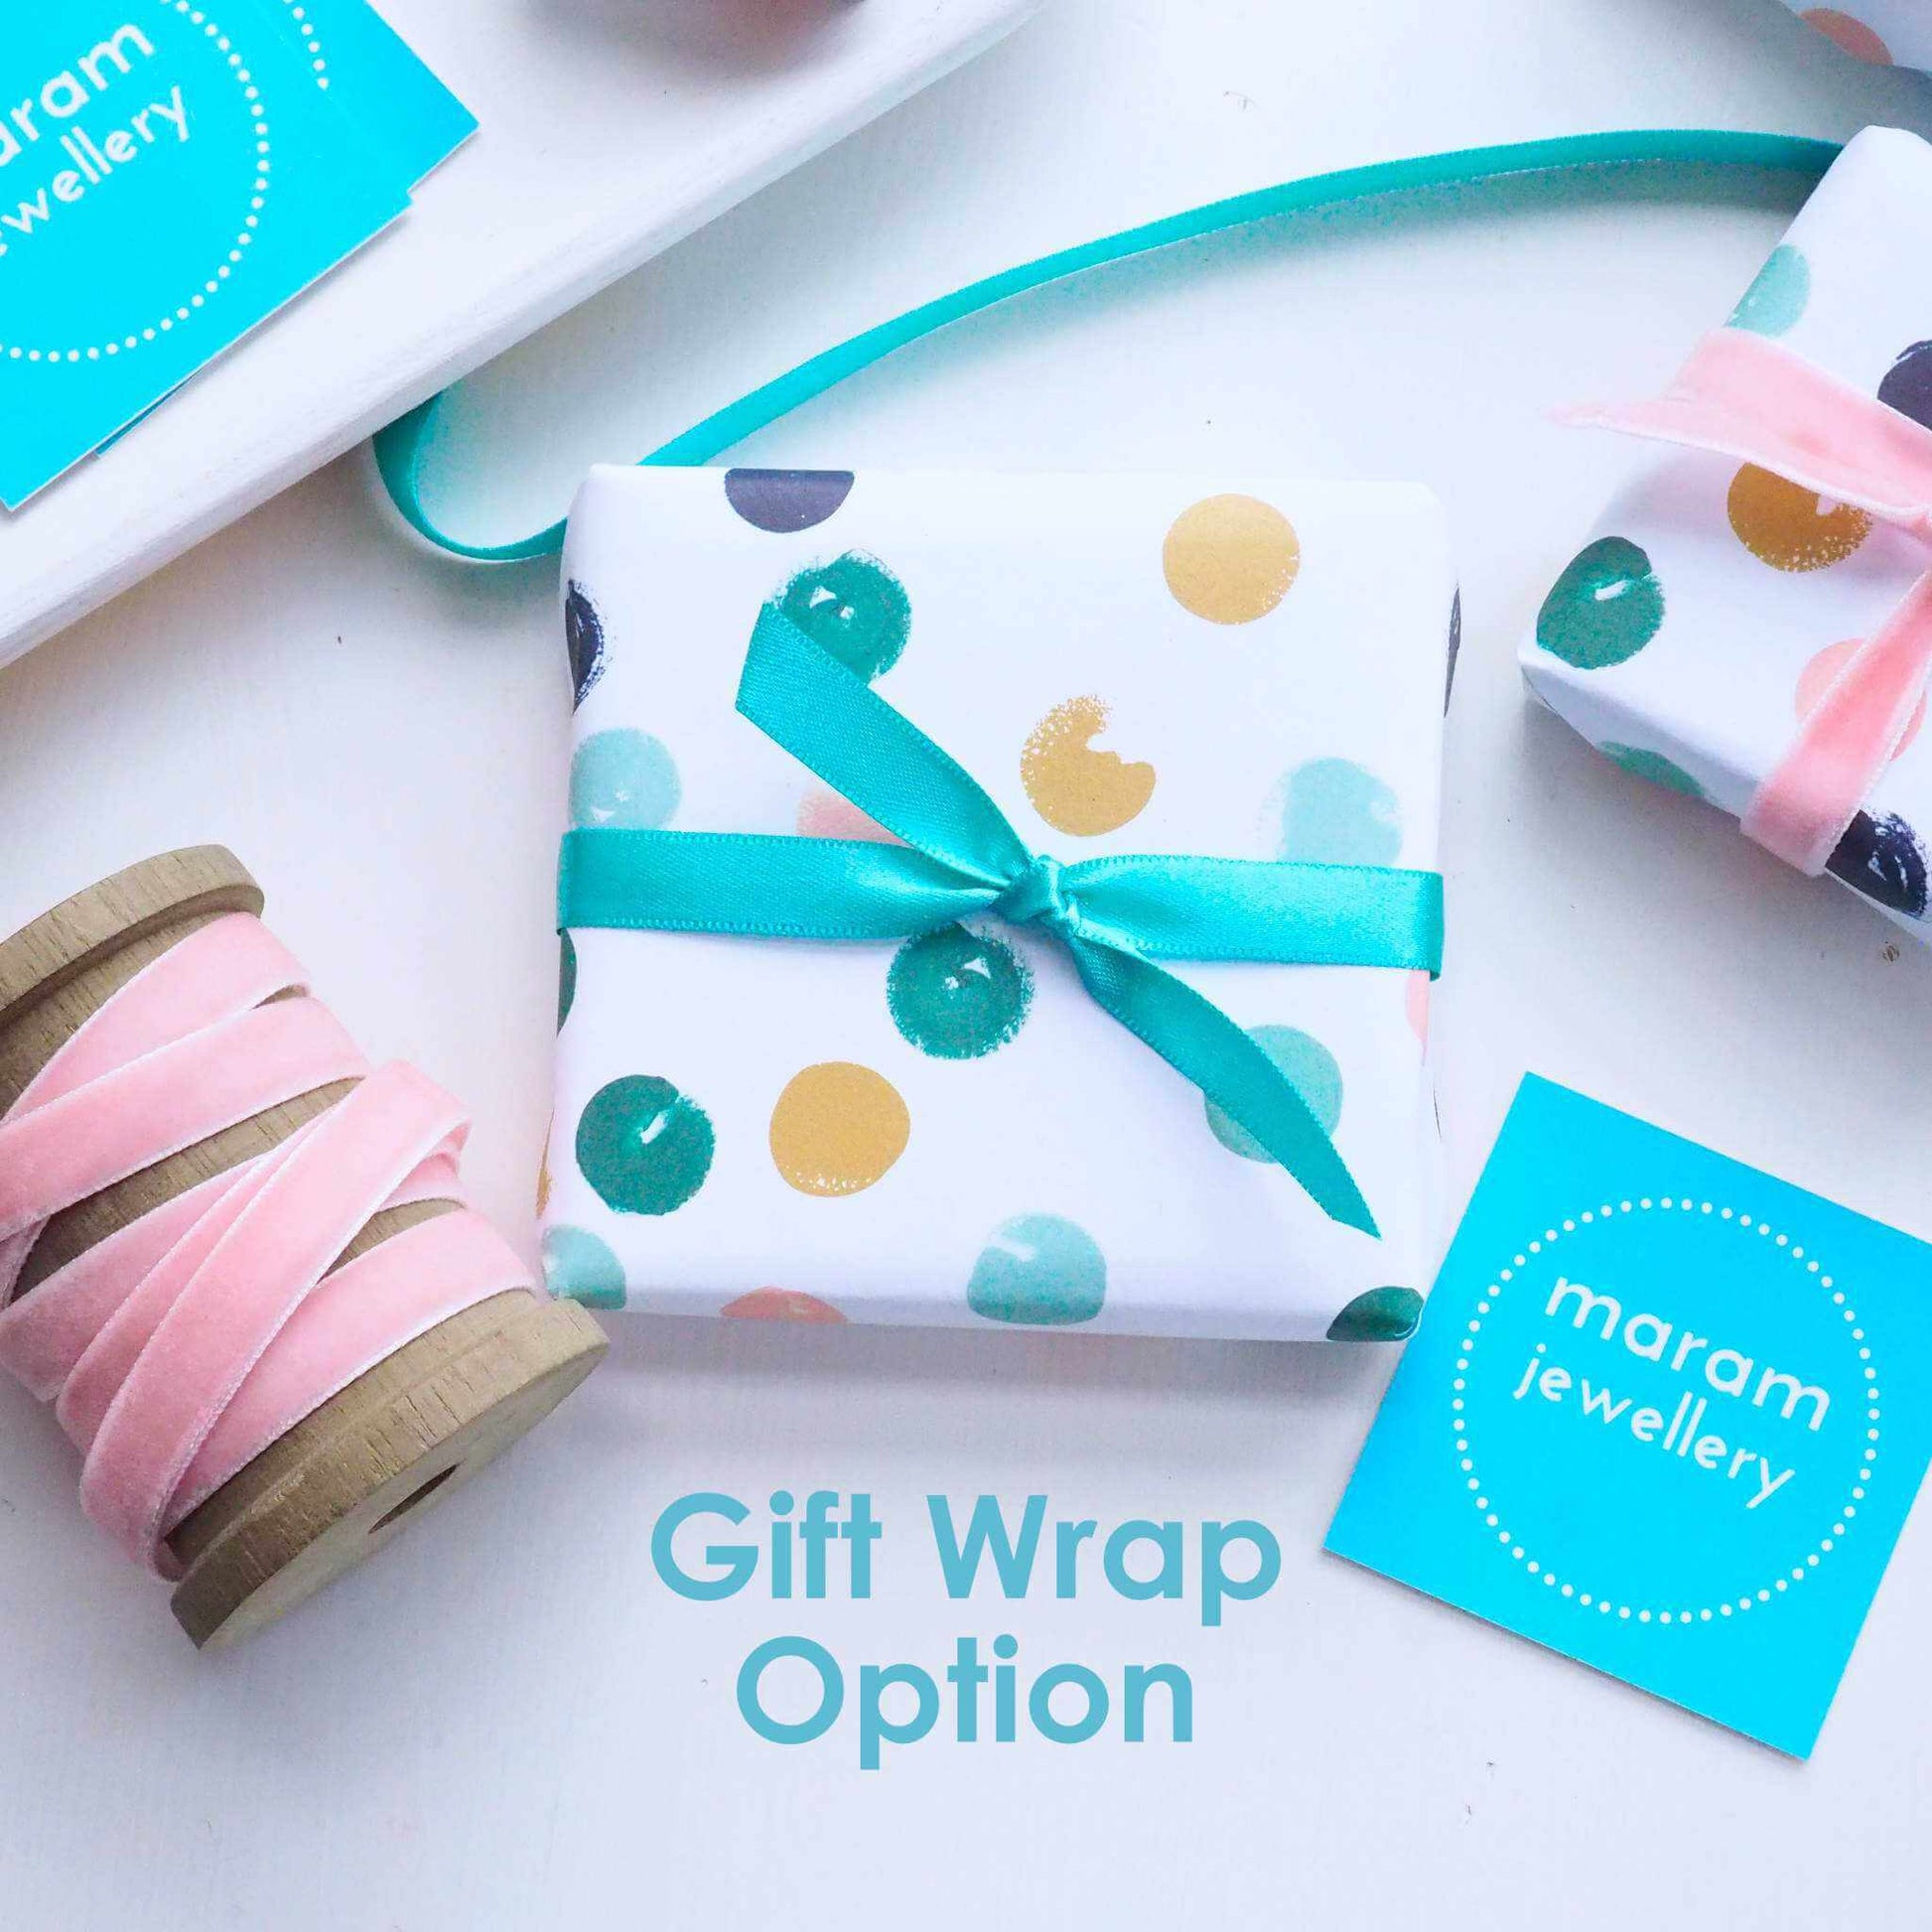 maram jewellery gift wrap option with text. Luxury dotty wrap tied with green ribbon pictured with velvet pink and green ribbon